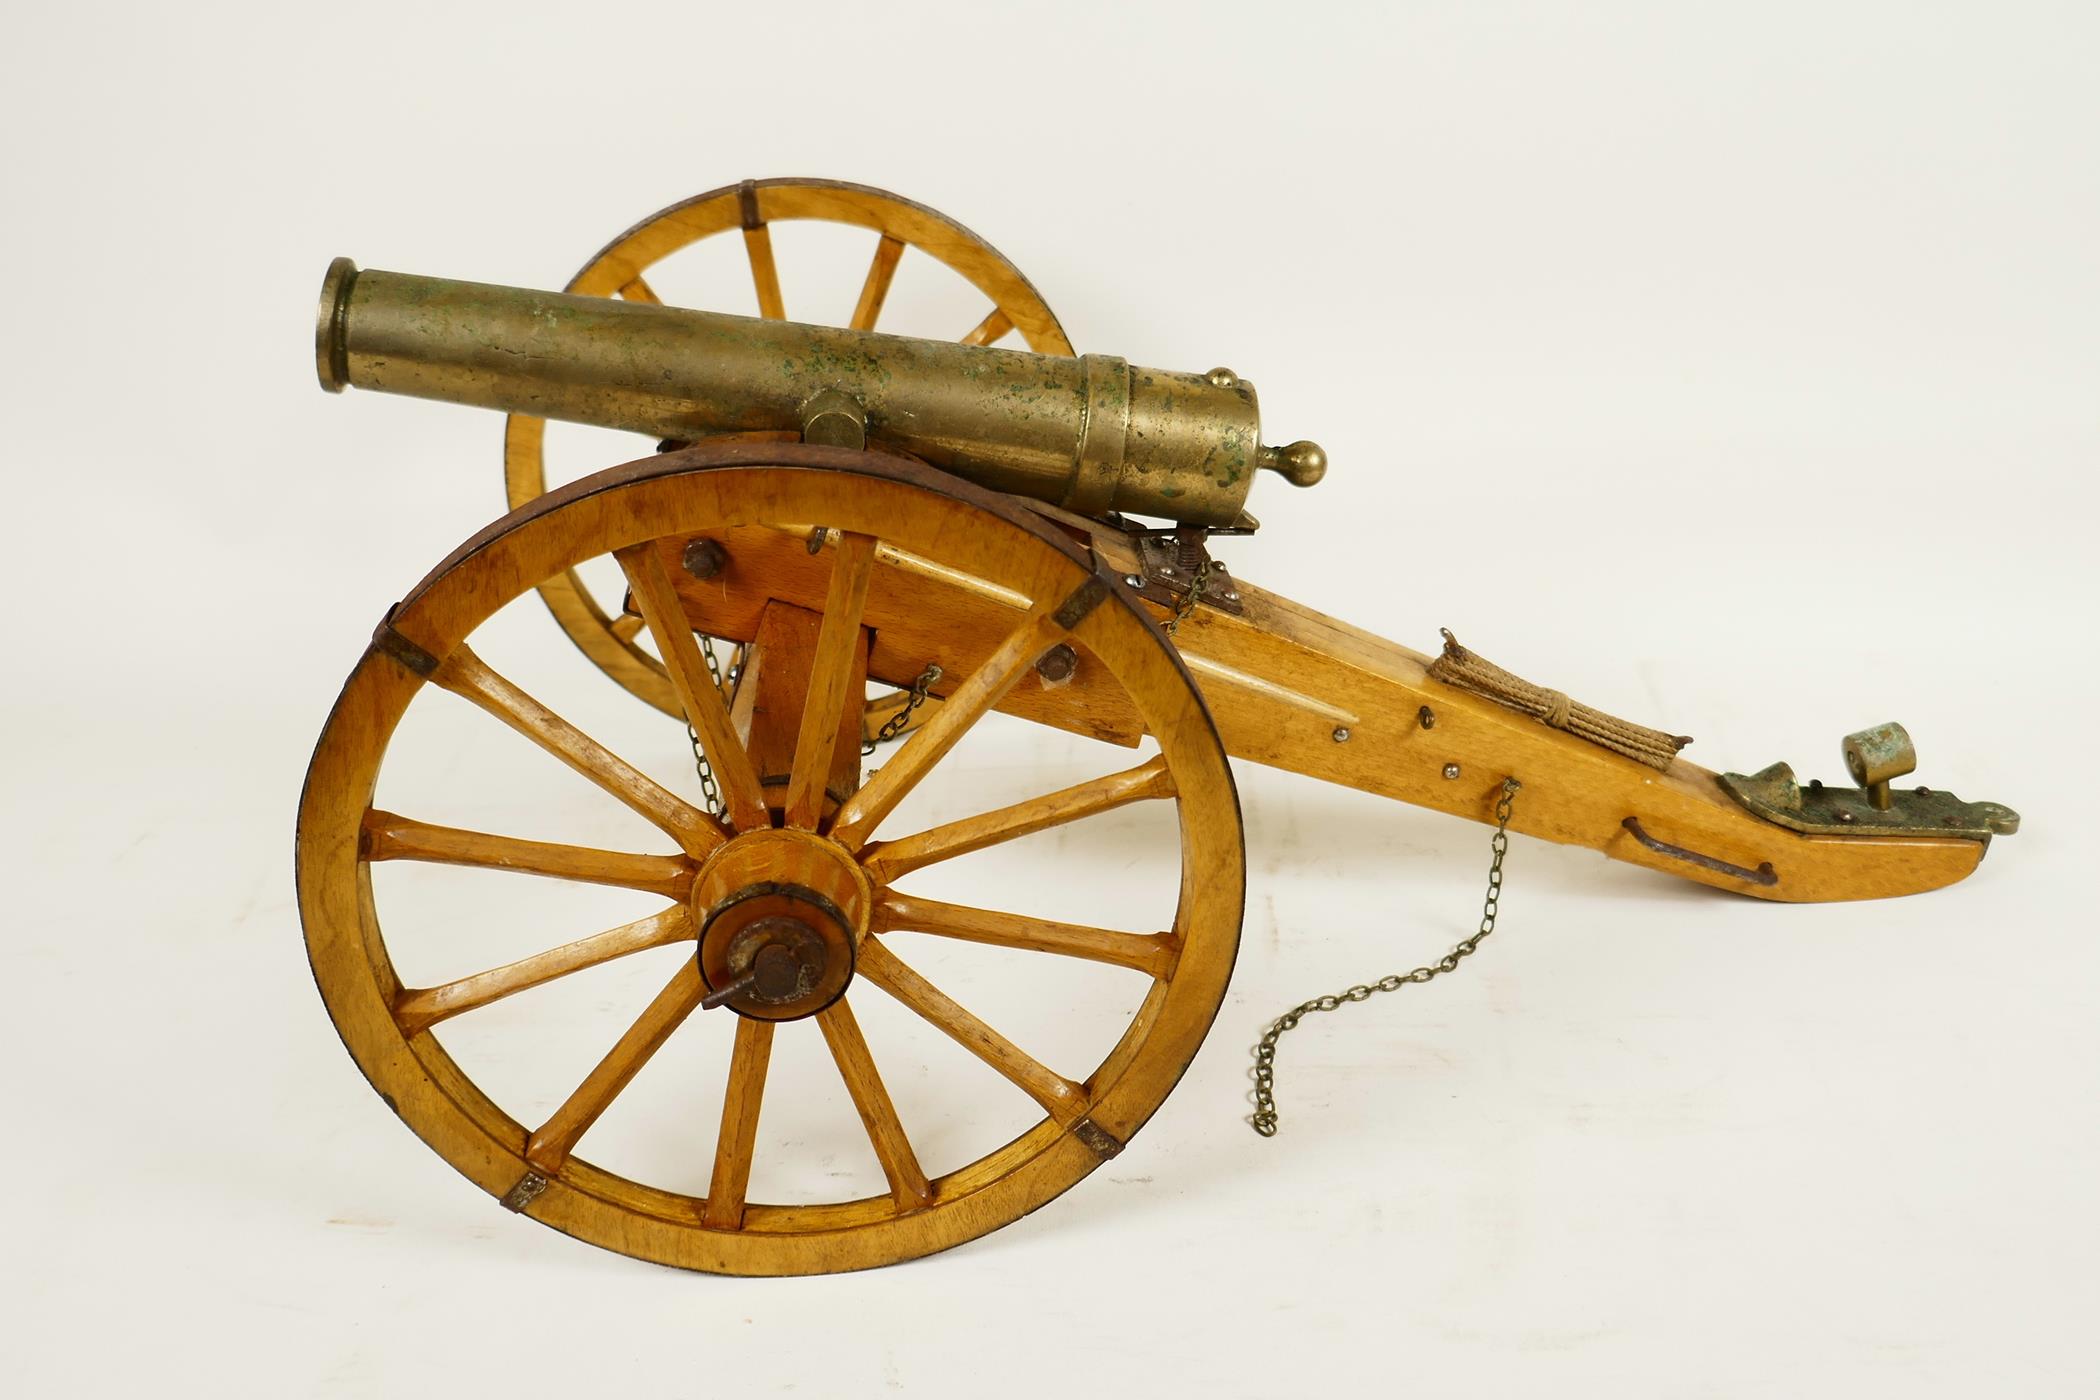 An antique ornamental table top bronze cannon, on a hand made wooden carriage with metal fittings,